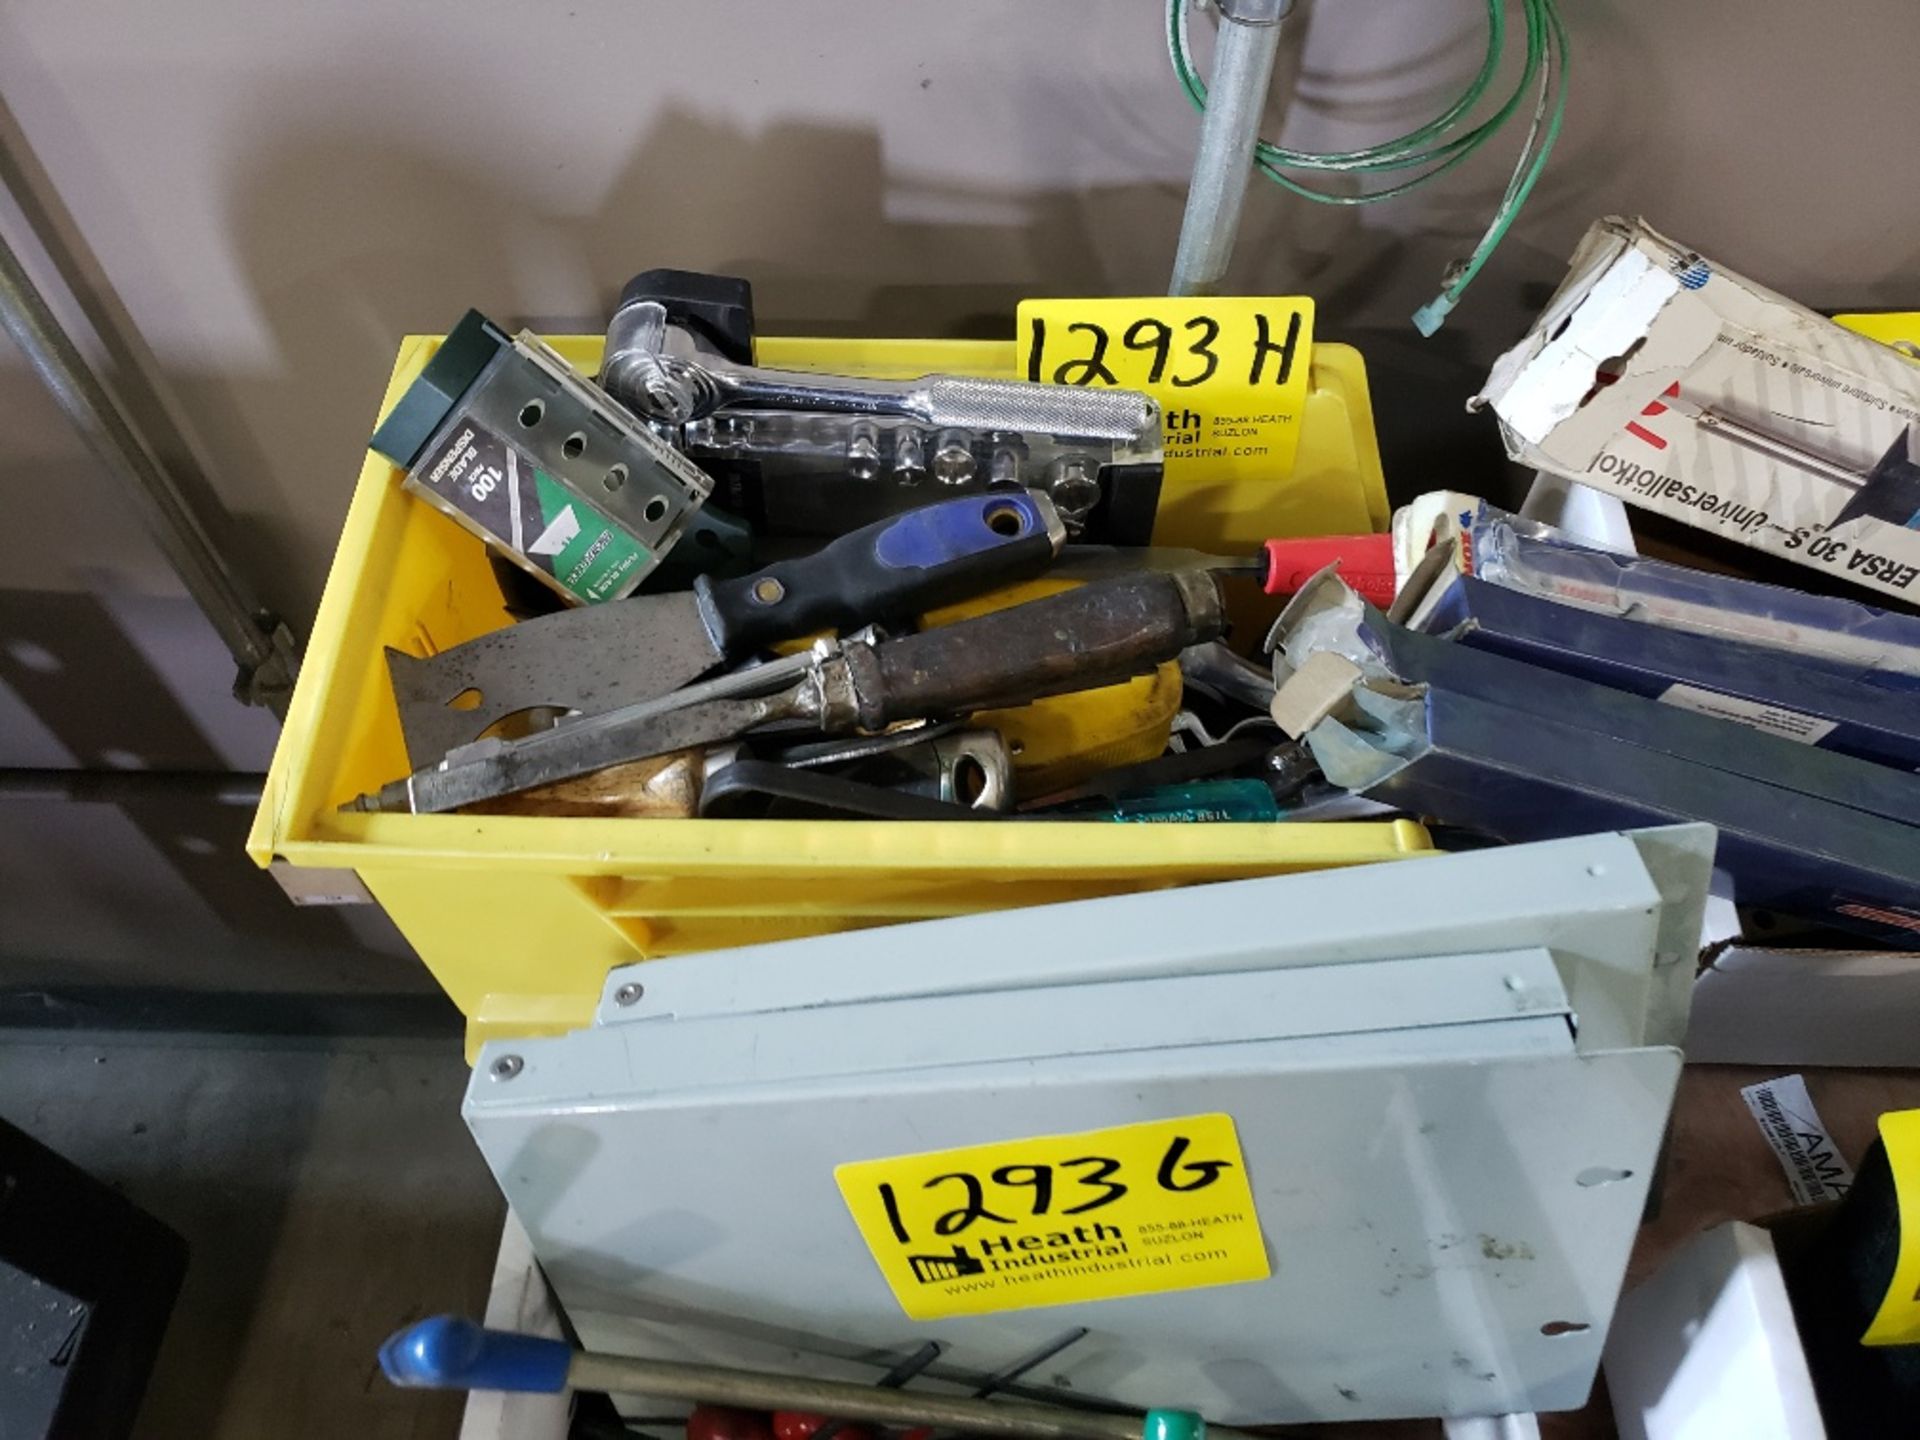 ASSORTED TOOLS, WIRE BRUSHES, UTILITY KNIVES, SOCKETS, ETC